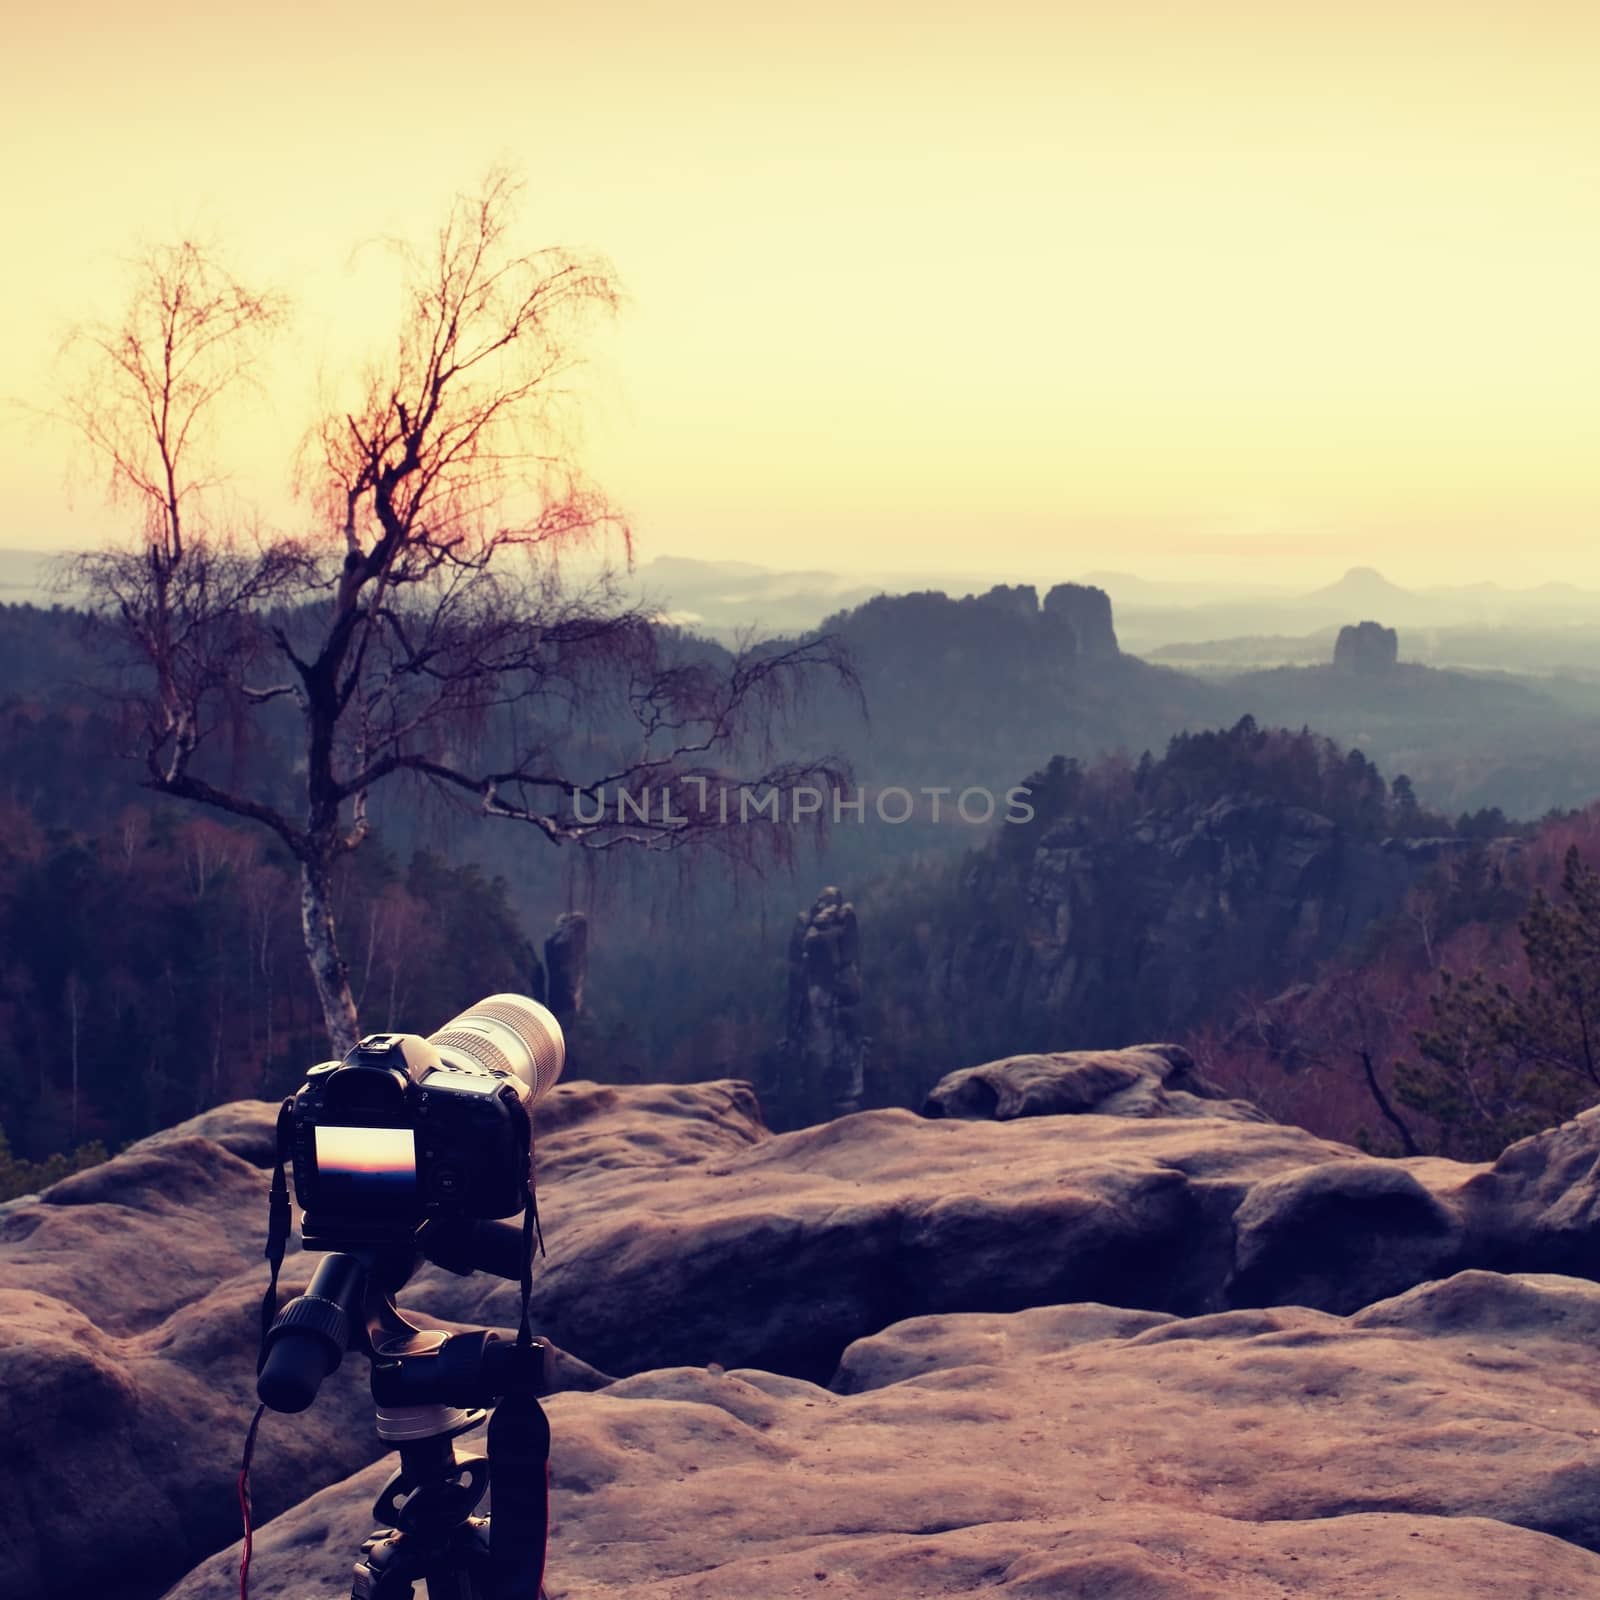 Tripod with big camera stand on mountain peak after sunset. Sharp sandstone cliffs by rdonar2